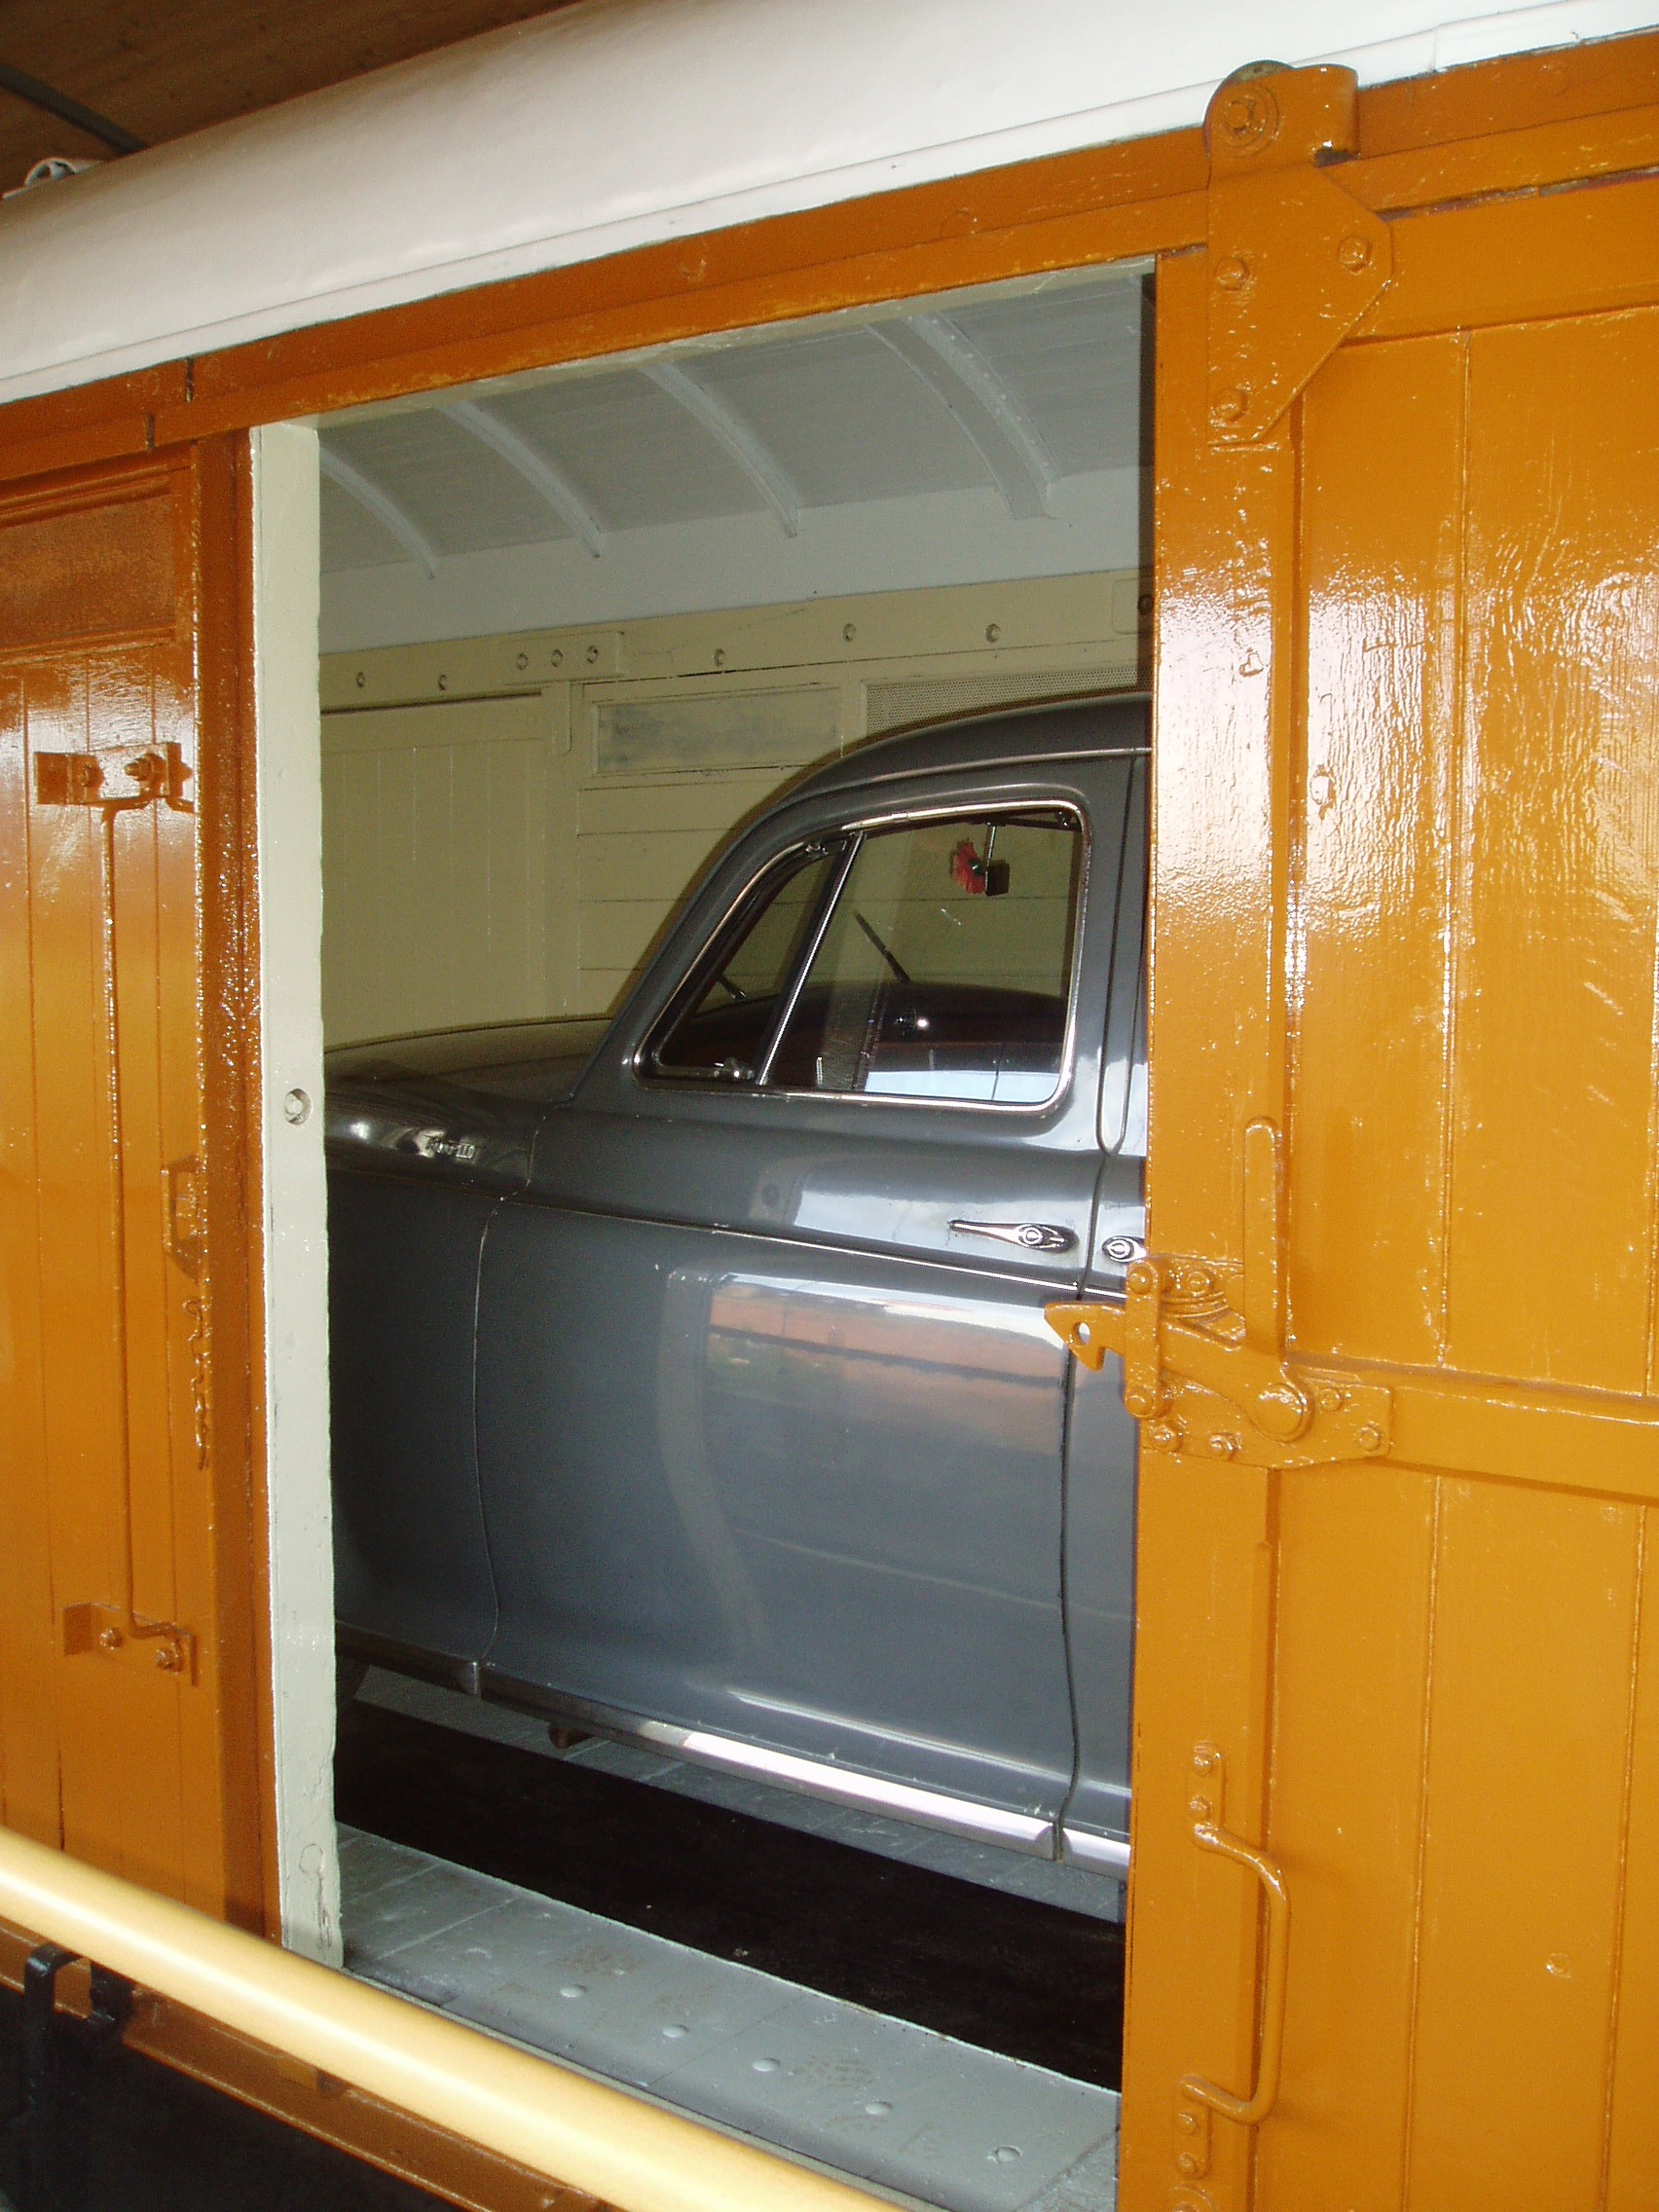 As it will be seen by visitors outside of the wagon through one of the side doors.